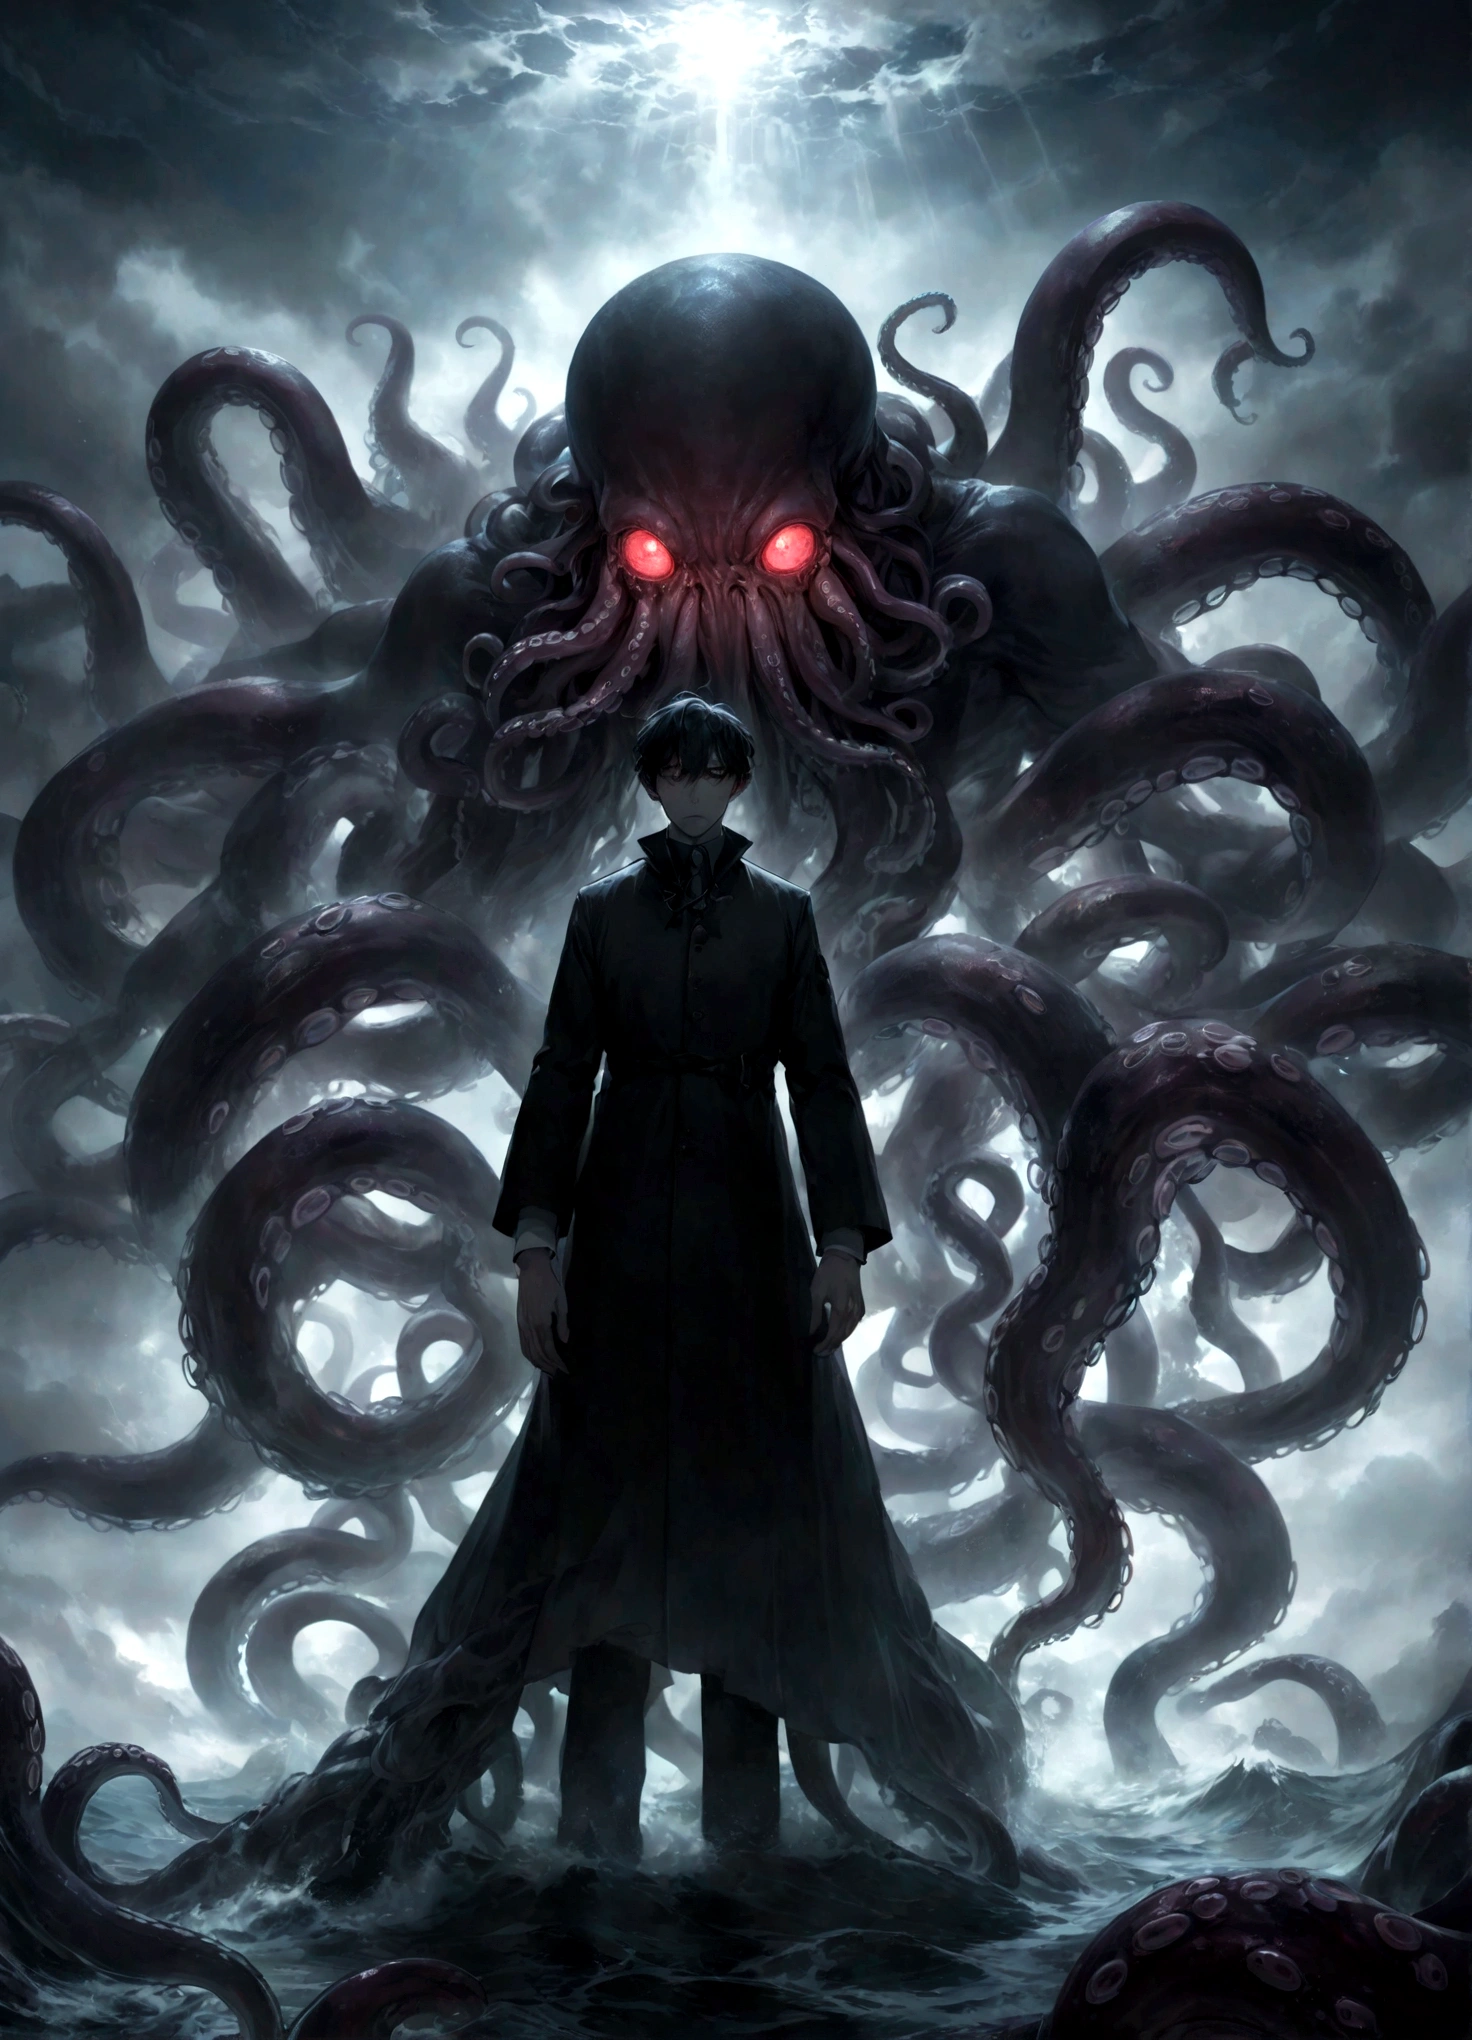 A dark fantasy scene depicting the terrifying creature Cthulhu,emerging from the abyss. The monstrous figure,shrouded in shadows,has large,((menacing tentacles reaching out toward the viewer:1.3)),The atmosphere is eerie and foreboding,with a stormy,nightmarish sky filled with swirling dark clouds. The sea below is turbulent and foamy,reflecting the chaos above. Dim,ghostly lights illuminate parts of Cthulhu’s form,enhancing the horror. The viewer feels an intense sense of dread as the tentacles draw nearer,creating a gripping,immersive experience.,(masterpiece:1.3),(highest quality:1.4),(ultra detailed:1.5),High resolution,extremely detailed,unity 8k wallpaper,(Draws a dark and decadent background,Expresses the fear that the viewer feels,collapses the bottom of the image,Please express it artistically by blurring it in some places.),dynamically,Presence,fear,despair,dark fantasy,Nervousness,Light and darkness